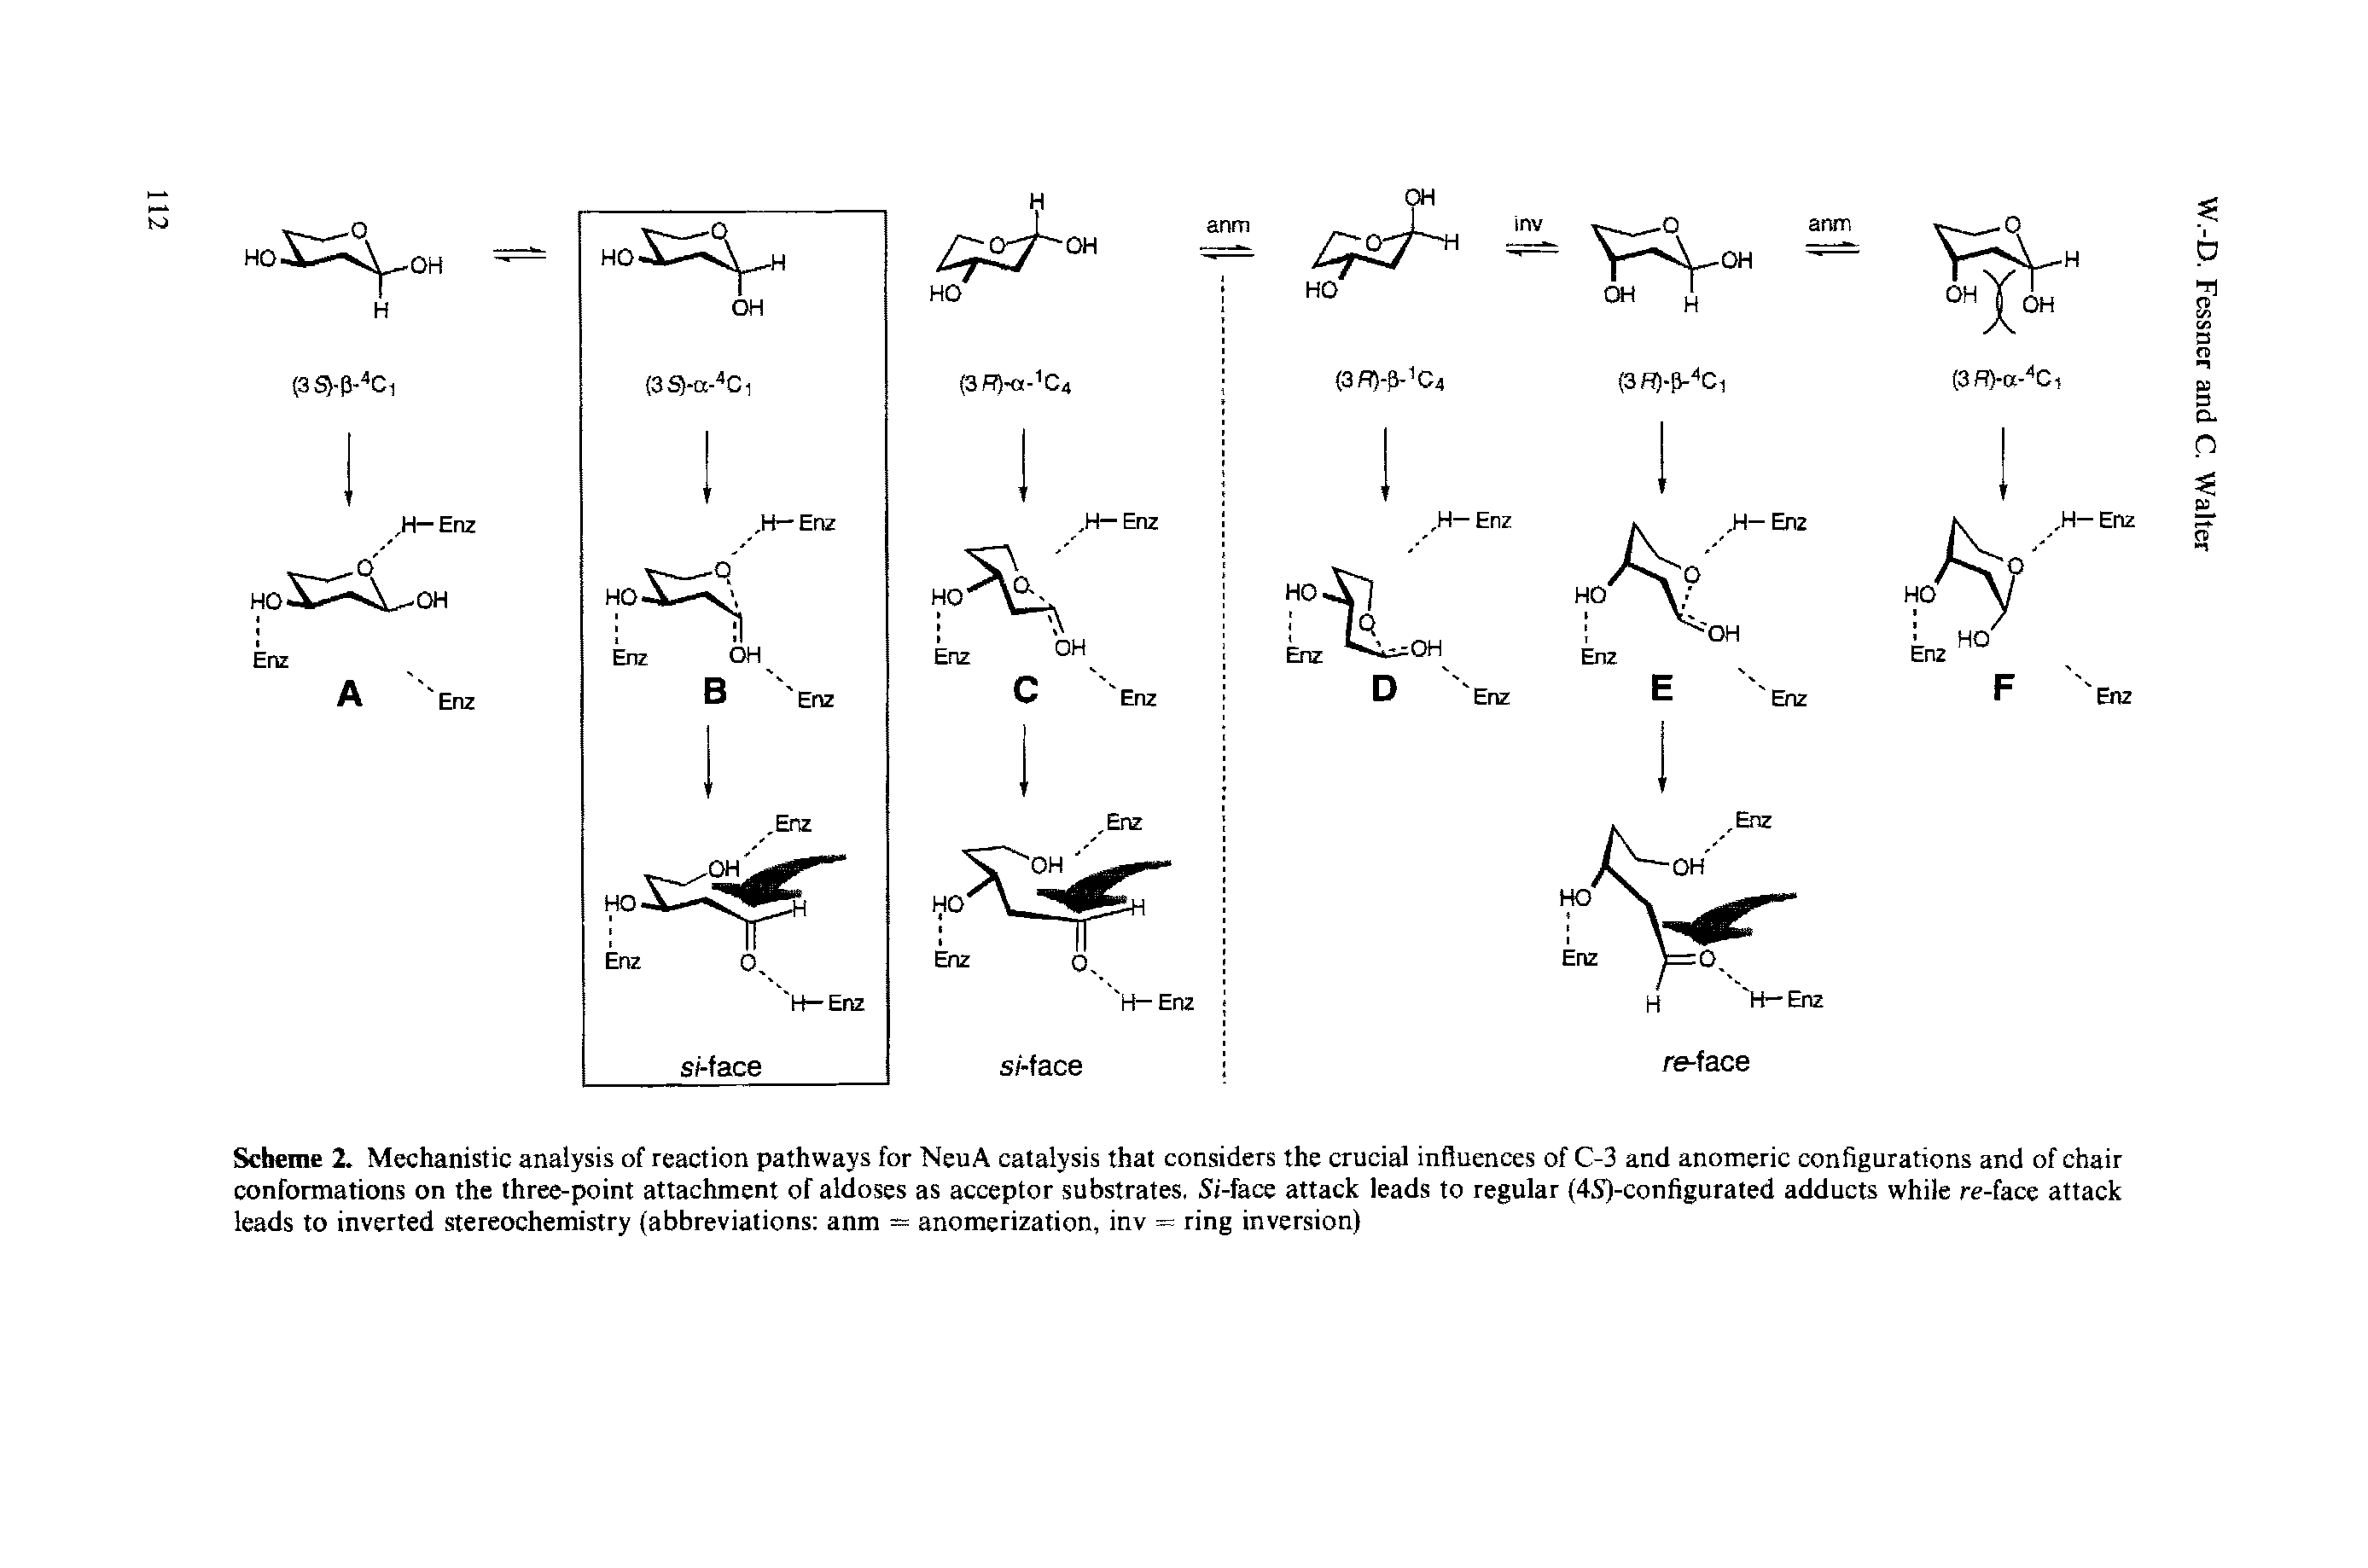 Scheme 2. Mechanistic analysis of reaction pathways for NeuA catalysis that considers the crucial influences of C-3 and anomeric configurations and of chair conformations on the three-point attachment of aldoses as acceptor substrates, Si-face attack leads to regular (4S)-configurated adducts while re-face attack leads to inverted stereochemistry (abbreviations anm = anomerization, inv = ring inversion)...